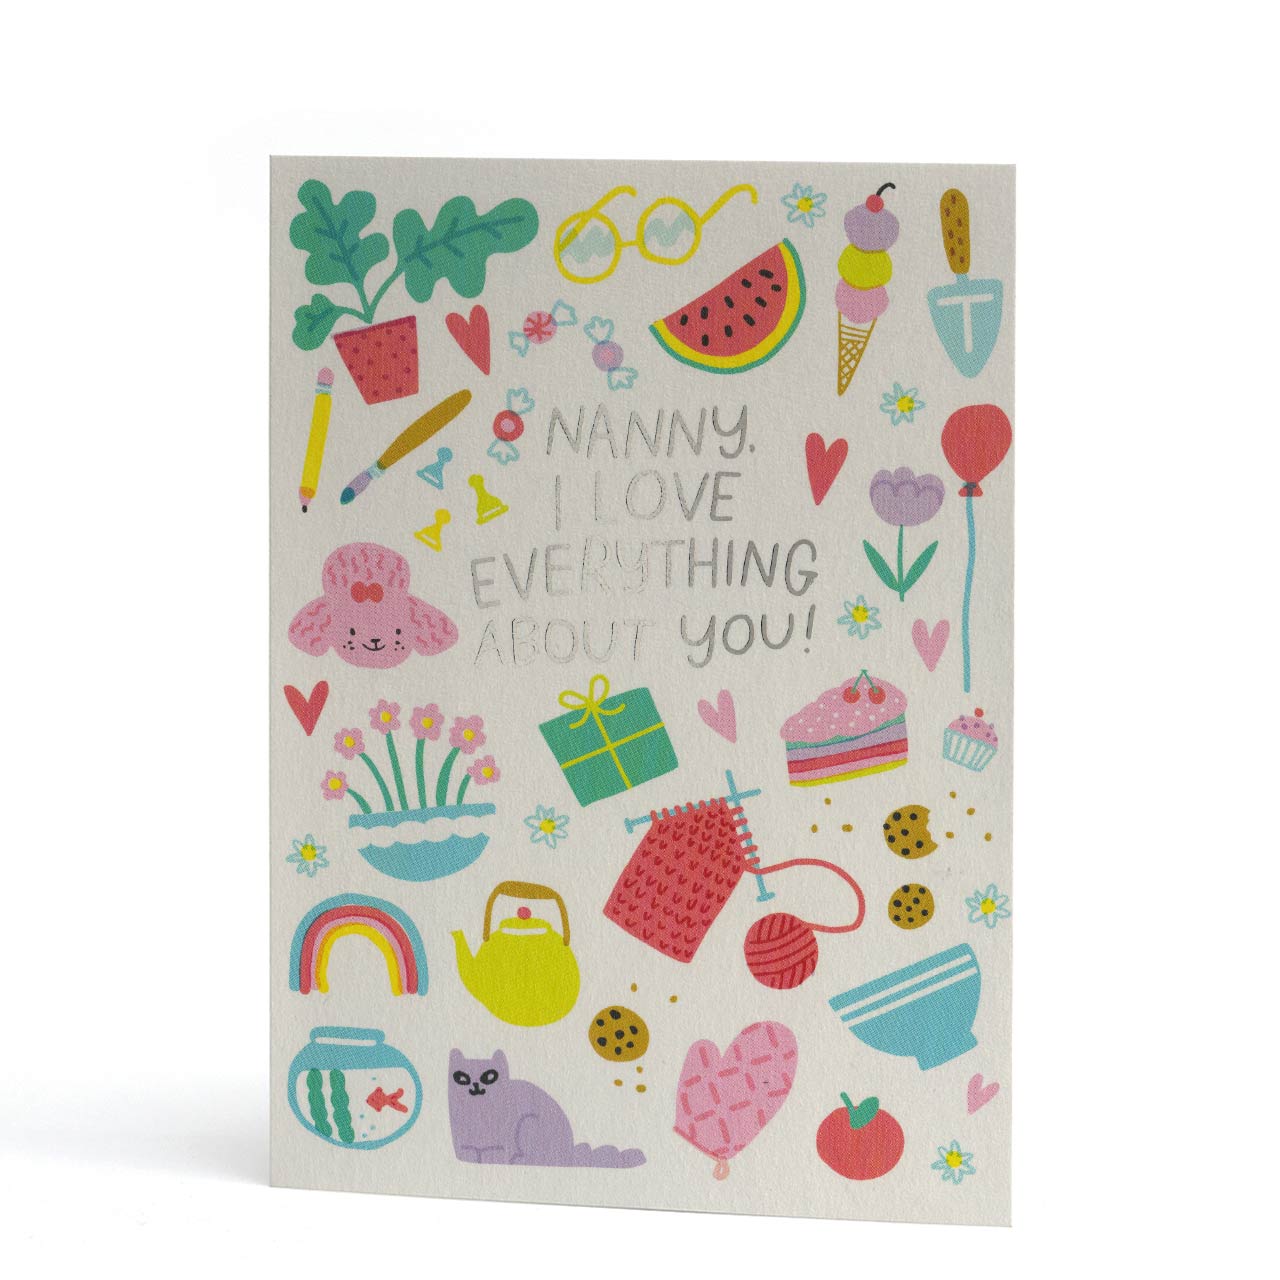 Nanny I Love Everything About You Silver Foil Card